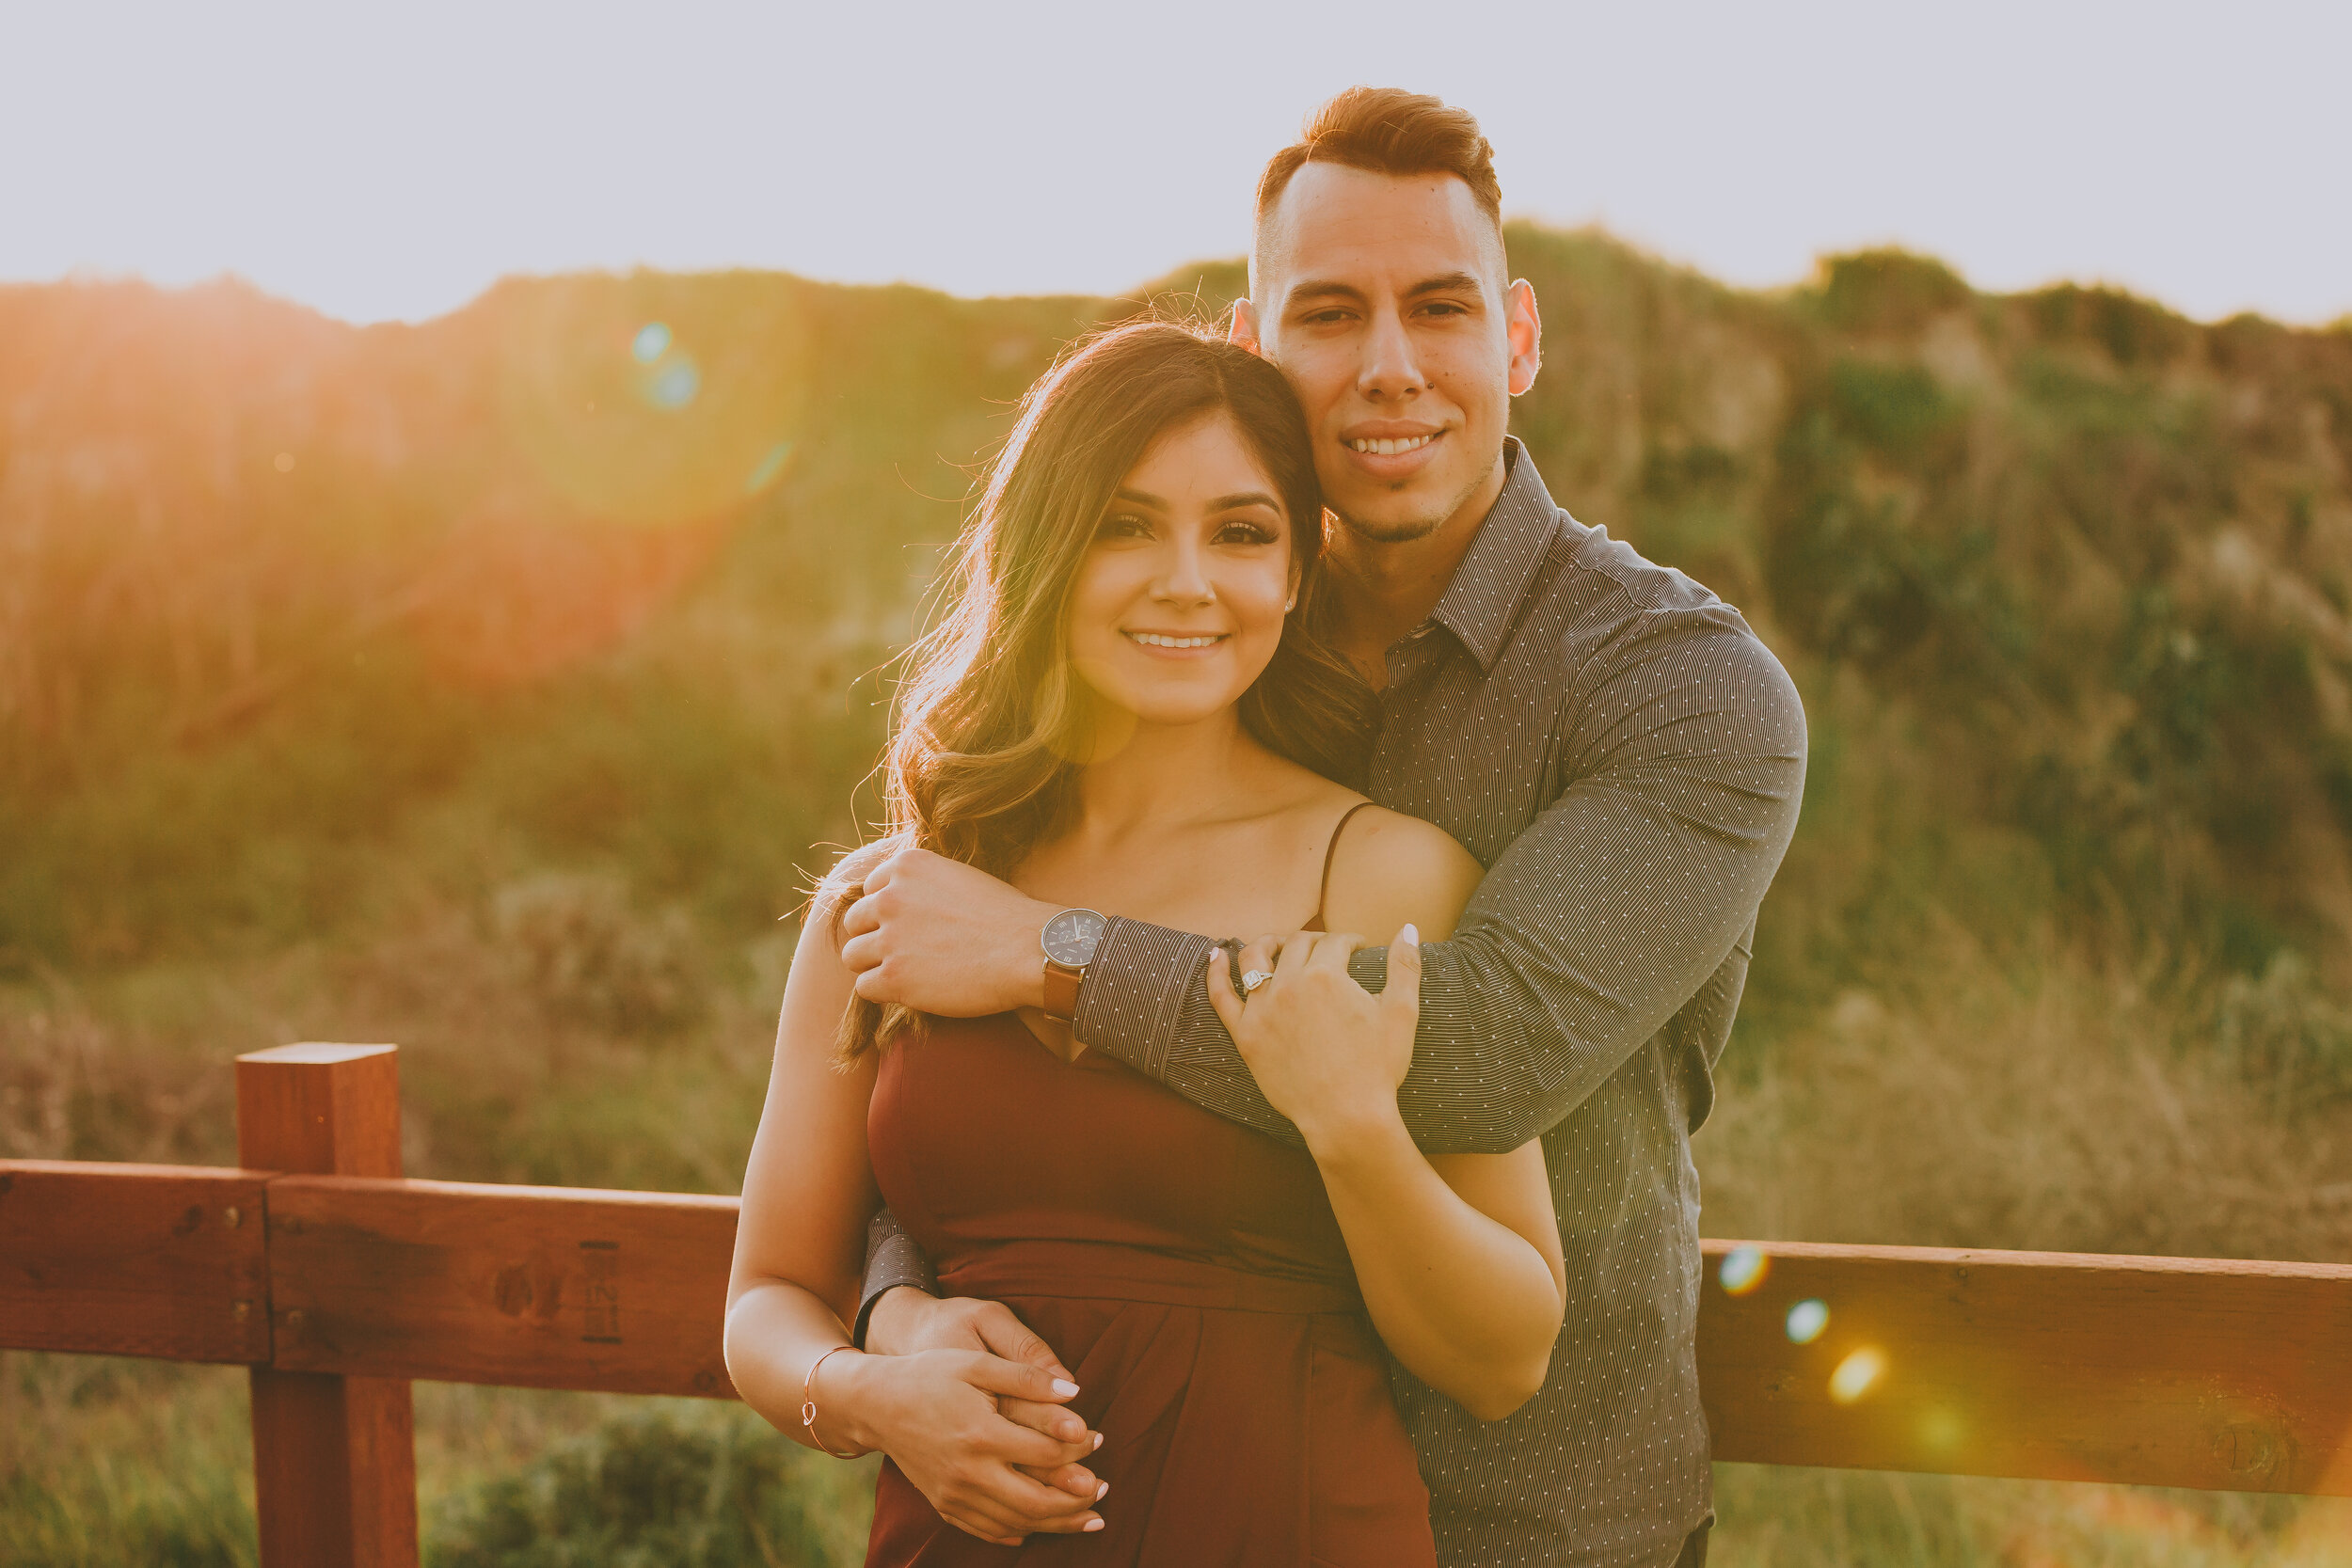 Fresno Engagament Photos - The Clausen Gallery - Samantha and Jesus-30.jpg